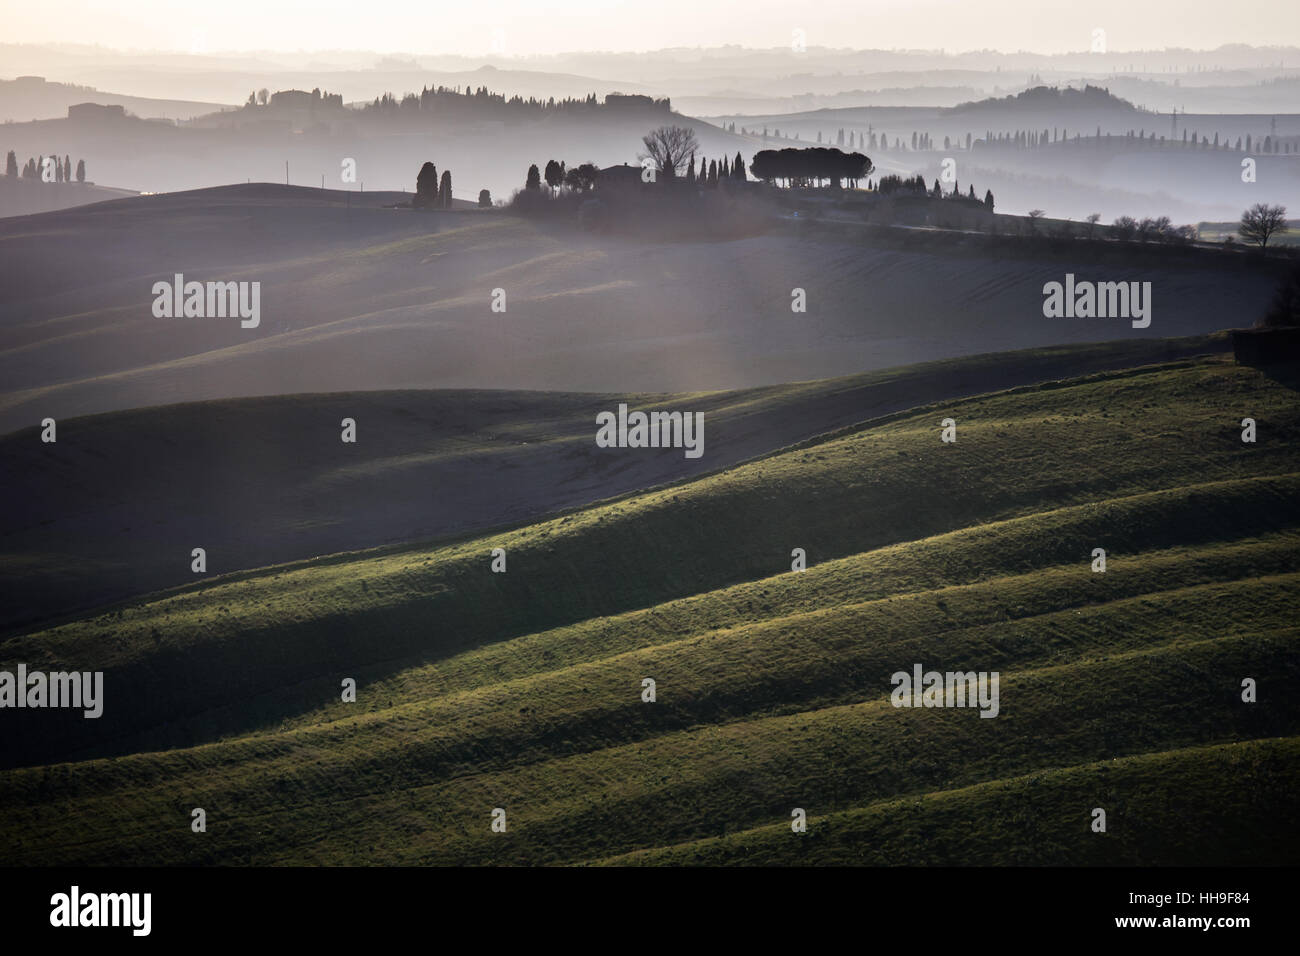 Tuscany, rolling hills on sunset. Crete Senesi rural landscape and sunlight. Green fields, a farm with trees. Siena, Italy Stock Photo